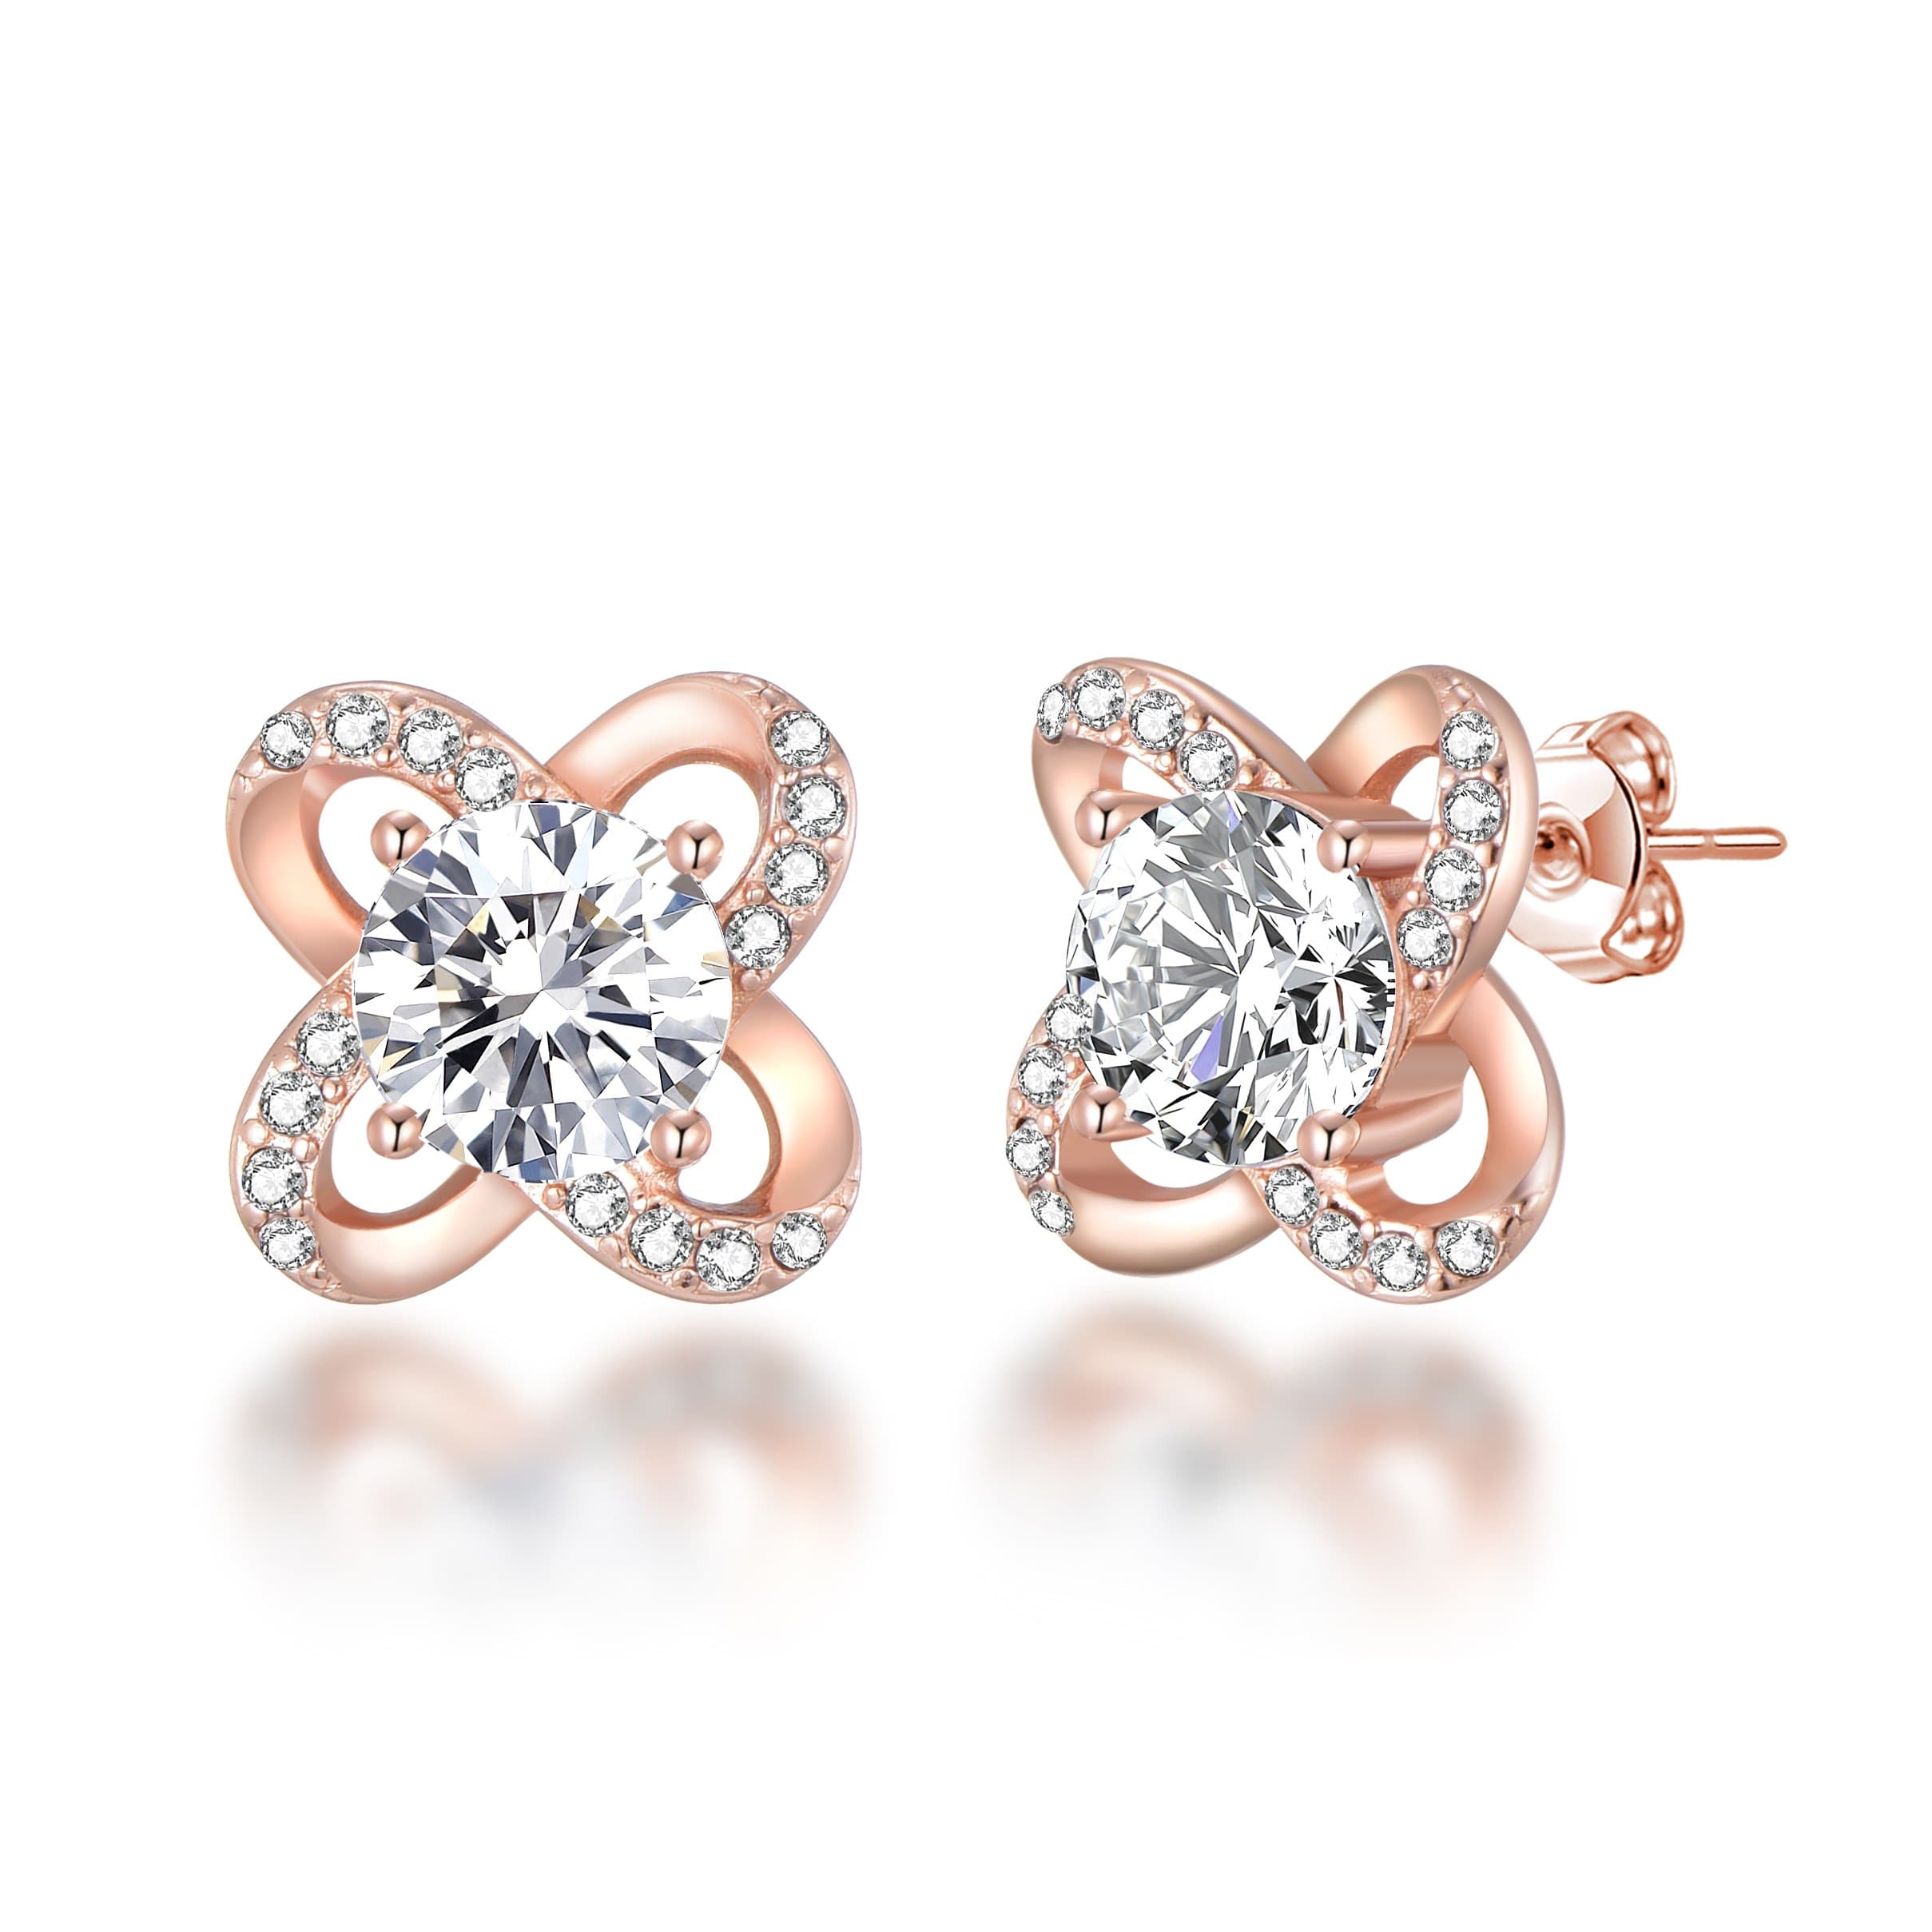 Rose Gold Plated Orbit Earrings Created with Zircondia® Crystals by Philip Jones Jewellery